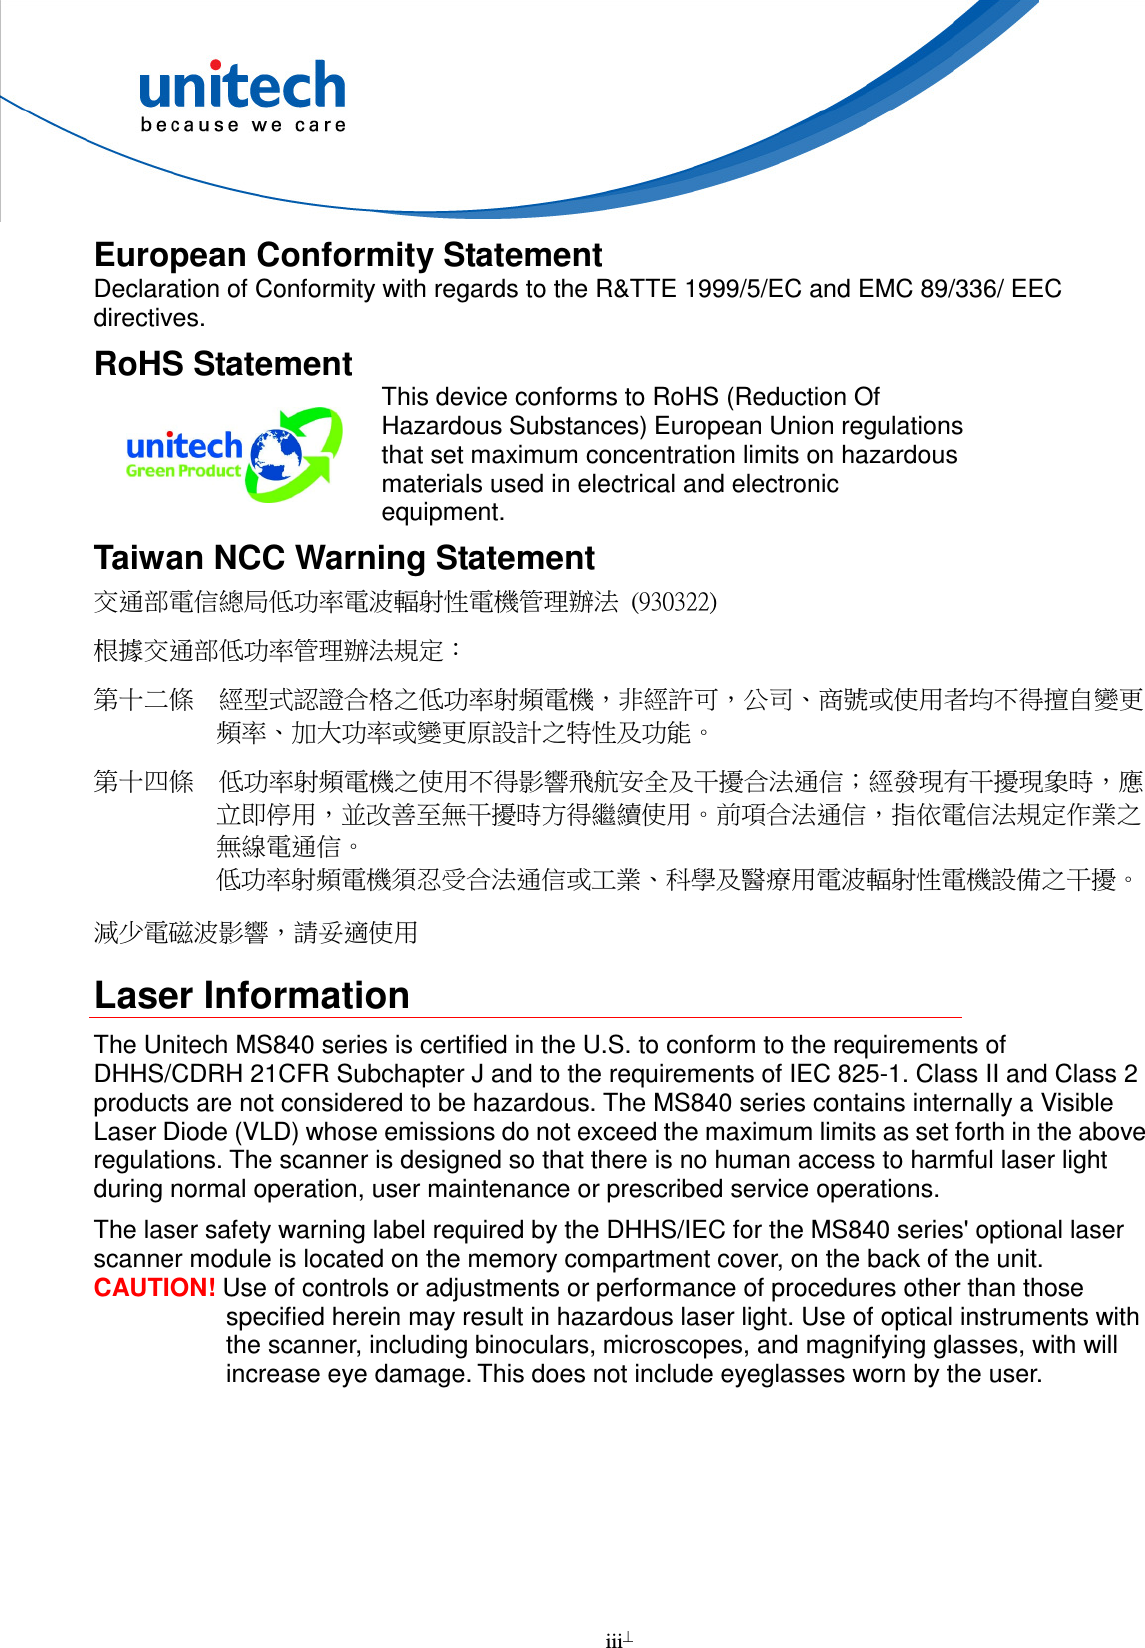  iii  European Conformity Statement Declaration of Conformity with regards to the R&amp;TTE 1999/5/EC and EMC 89/336/ EEC directives. RoHS Statement  This device conforms to RoHS (Reduction Of Hazardous Substances) European Union regulations that set maximum concentration limits on hazardous materials used in electrical and electronic equipment. Taiwan NCC Warning Statement 交通部電信總局低功率電波輻射性電機管理辦法  (930322) 根據交通部低功率管理辦法規定： 第十二條  經型式認證合格之低功率射頻電機，非經許可，公司、商號或使用者均不得擅自變更頻率、加大功率或變更原設計之特性及功能。 第十四條  低功率射頻電機之使用不得影響飛航安全及干擾合法通信；經發現有干擾現象時，應立即停用，並改善至無干擾時方得繼續使用。前項合法通信，指依電信法規定作業之無線電通信。 低功率射頻電機須忍受合法通信或工業、科學及醫療用電波輻射性電機設備之干擾。 減少電磁波影響，請妥適使用 Laser Information The Unitech MS840 series is certified in the U.S. to conform to the requirements of DHHS/CDRH 21CFR Subchapter J and to the requirements of IEC 825-1. Class II and Class 2 products are not considered to be hazardous. The MS840 series contains internally a Visible Laser Diode (VLD) whose emissions do not exceed the maximum limits as set forth in the above regulations. The scanner is designed so that there is no human access to harmful laser light during normal operation, user maintenance or prescribed service operations. The laser safety warning label required by the DHHS/IEC for the MS840 series&apos; optional laser scanner module is located on the memory compartment cover, on the back of the unit. CAUTION! Use of controls or adjustments or performance of procedures other than those specified herein may result in hazardous laser light. Use of optical instruments with the scanner, including binoculars, microscopes, and magnifying glasses, with will increase eye damage. This does not include eyeglasses worn by the user.